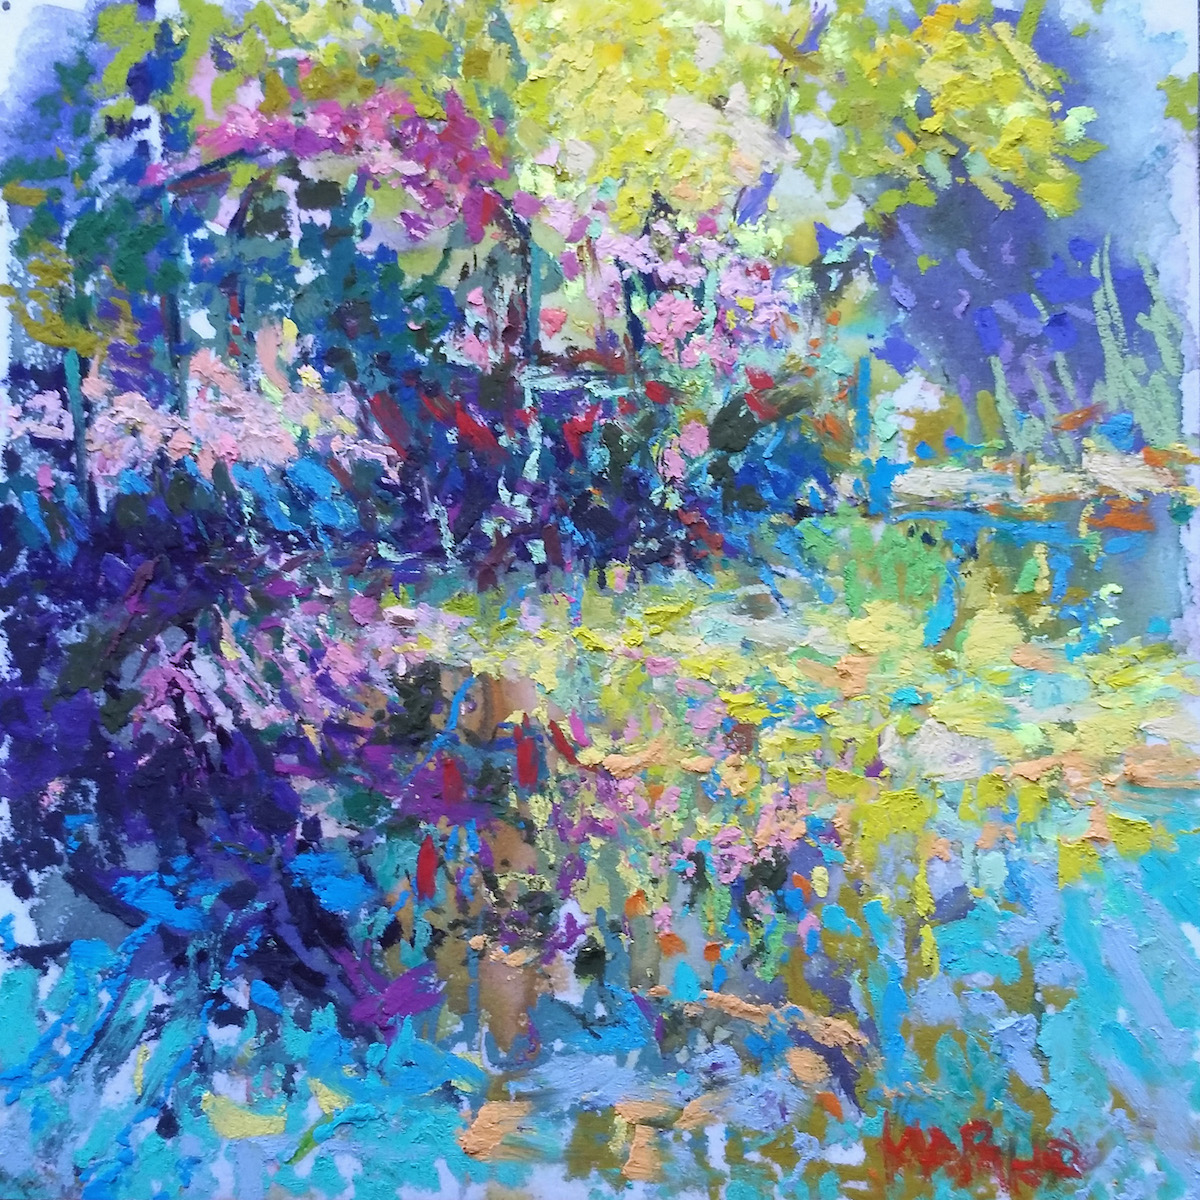 Maria Marino, "Summer Light," pastel on Multimedia Board, 6 x 6 on. Sold. Painted from a photo of a view of William Paca House Gardens, Annapolis, MD. (abstract microcosm)